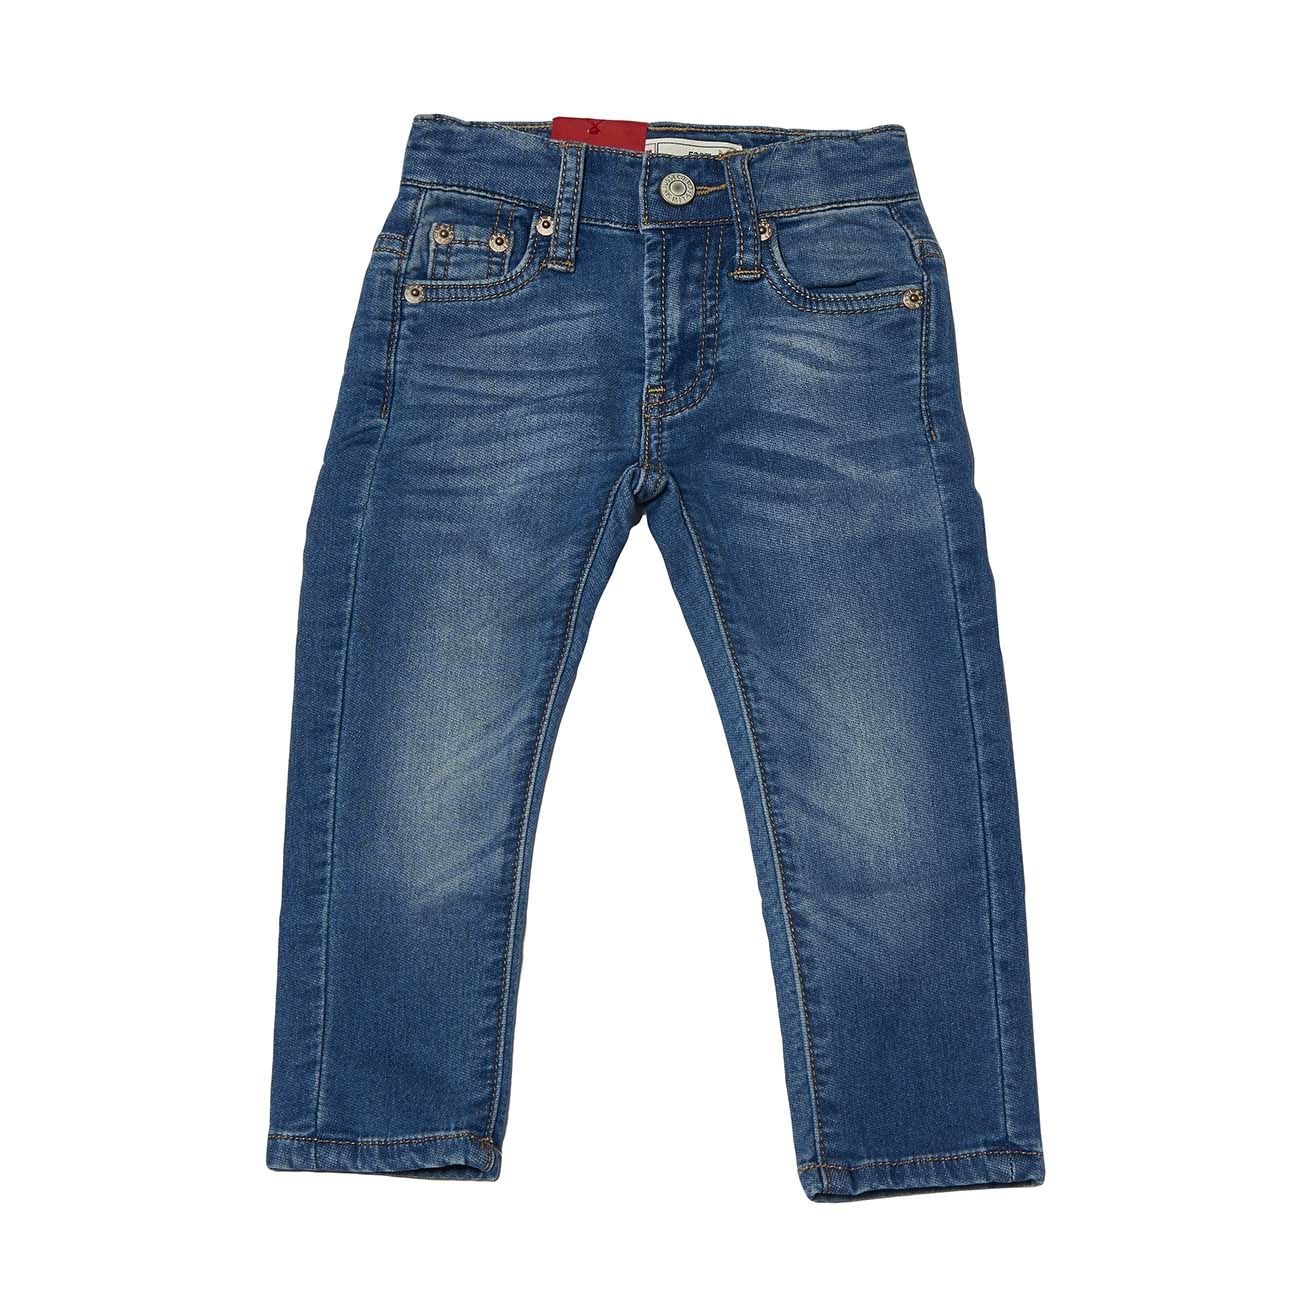 LEVIS 520 EXTREME TAPER FIT JEANS Kid 